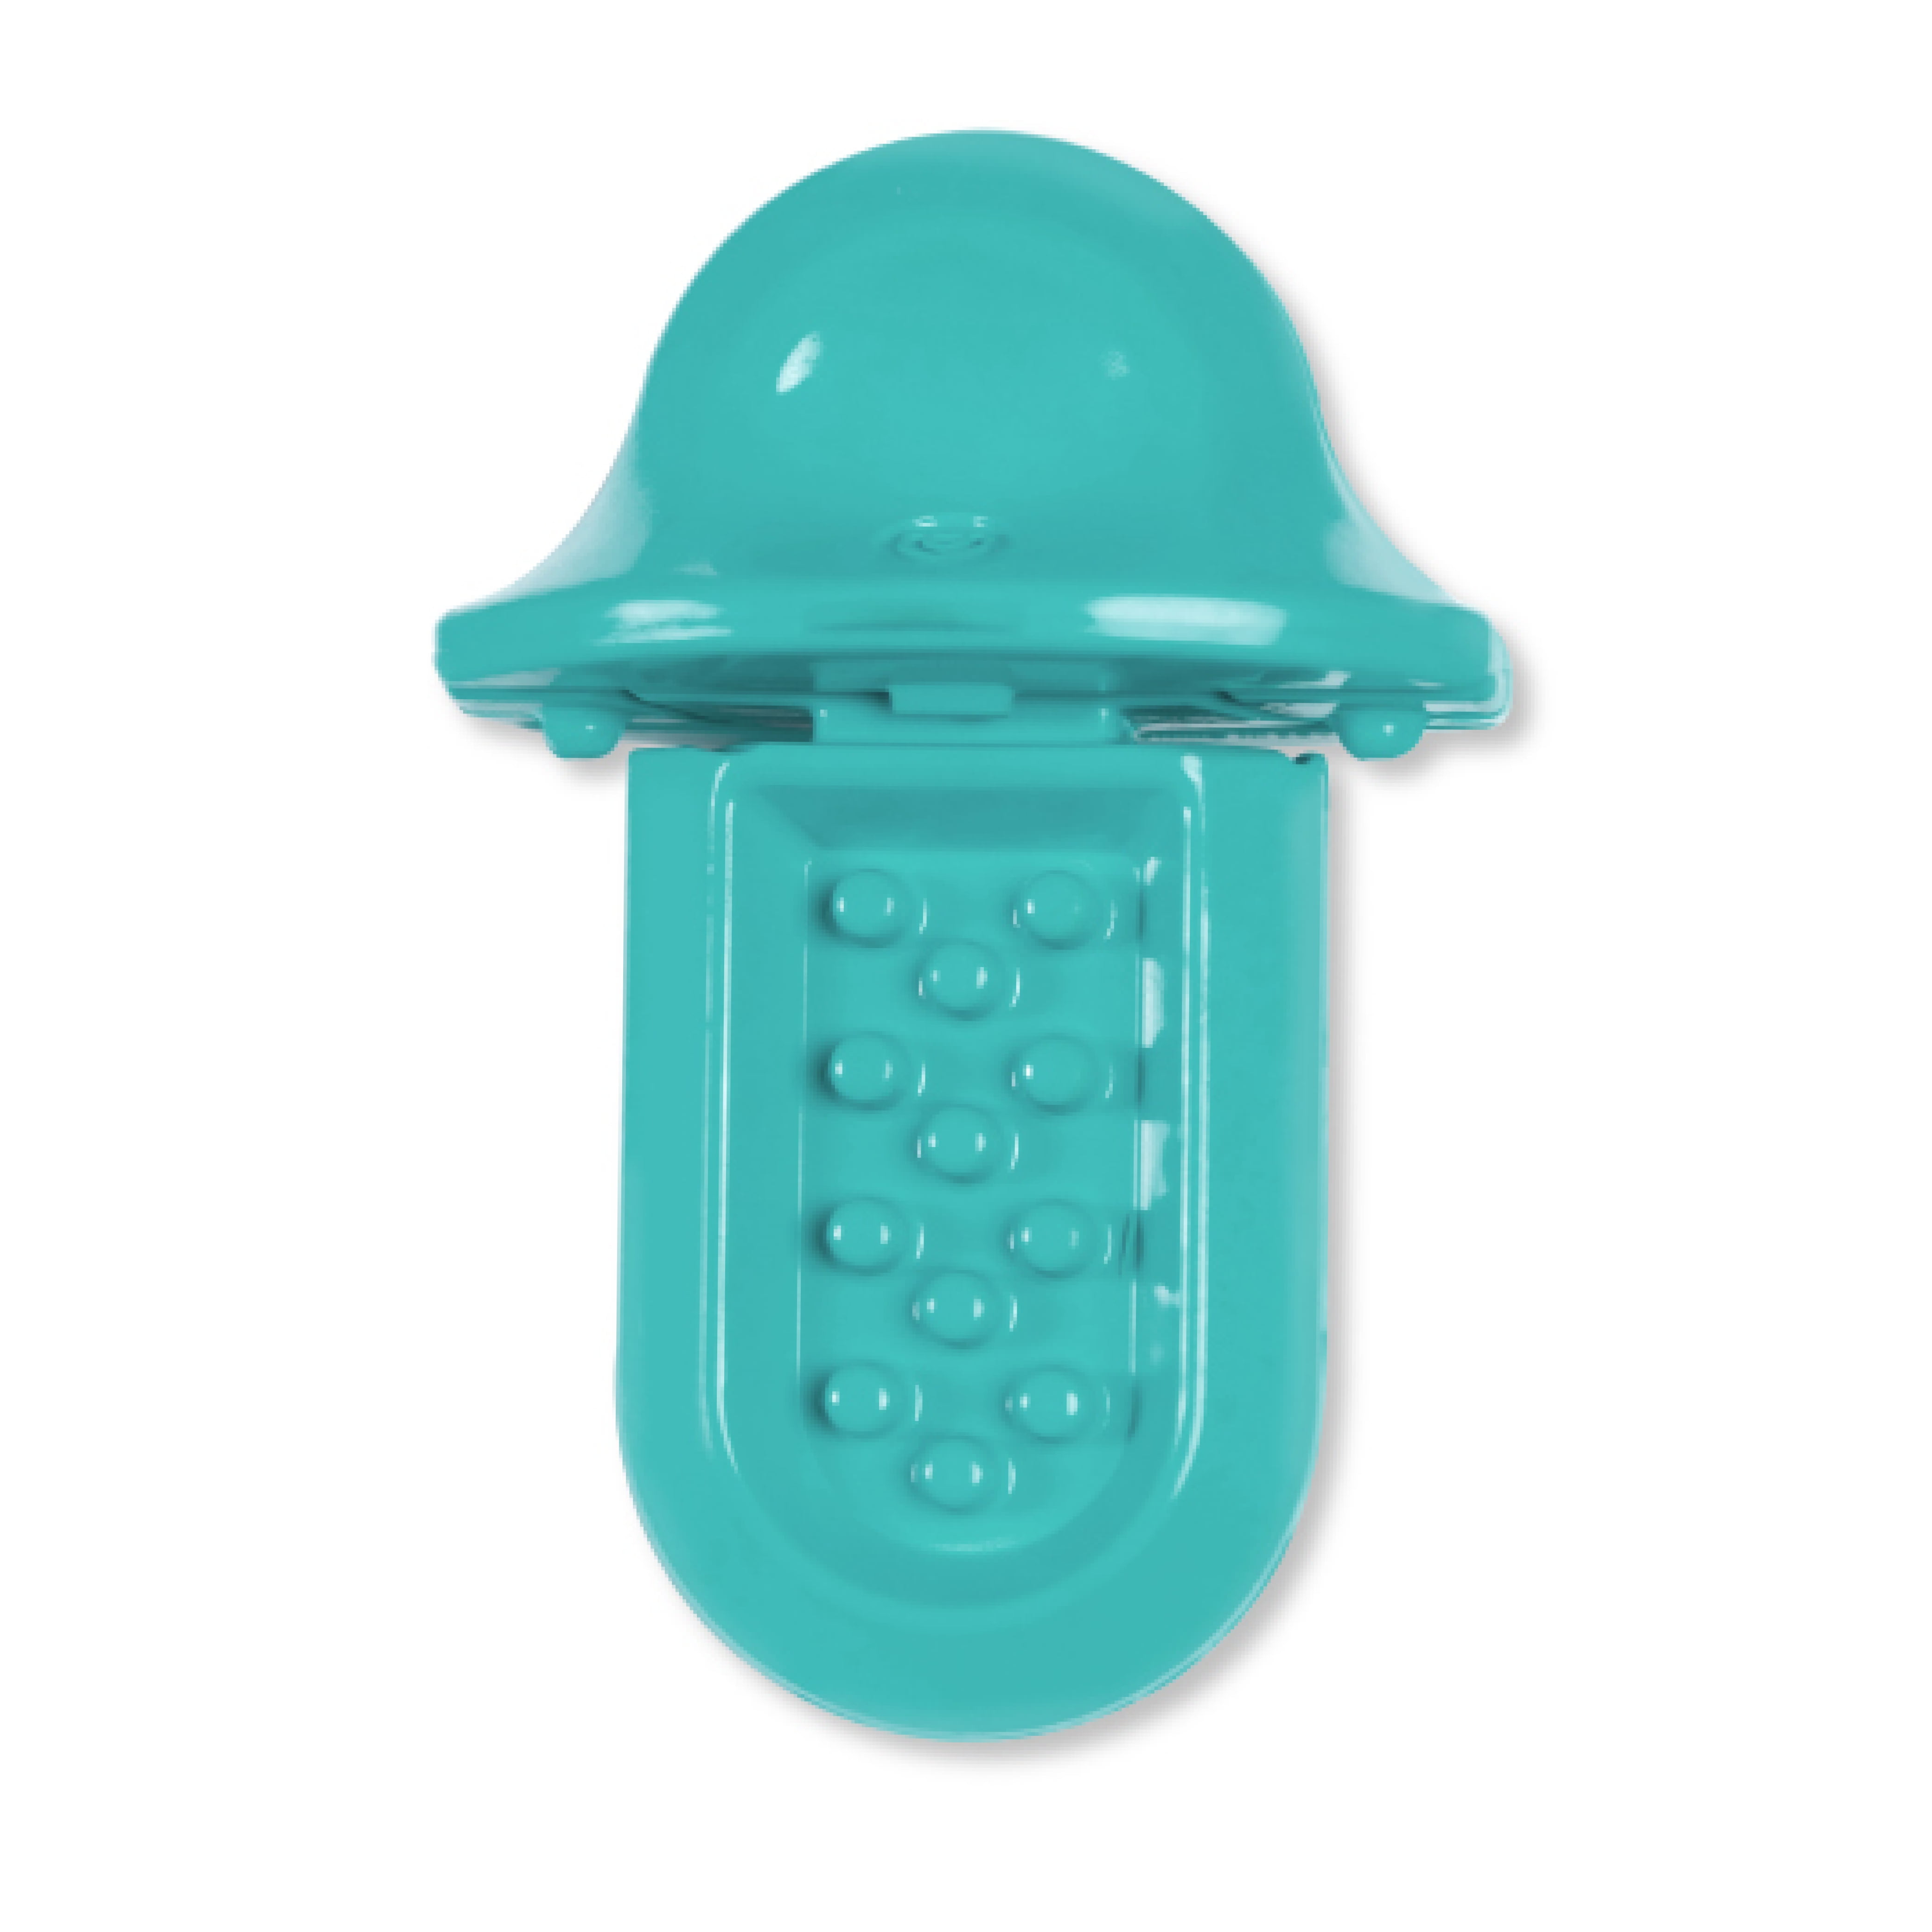 Diggs Groov Treat Dispenser Dog Toy and Crate Training Aid, Turquoise -  Walmart.com